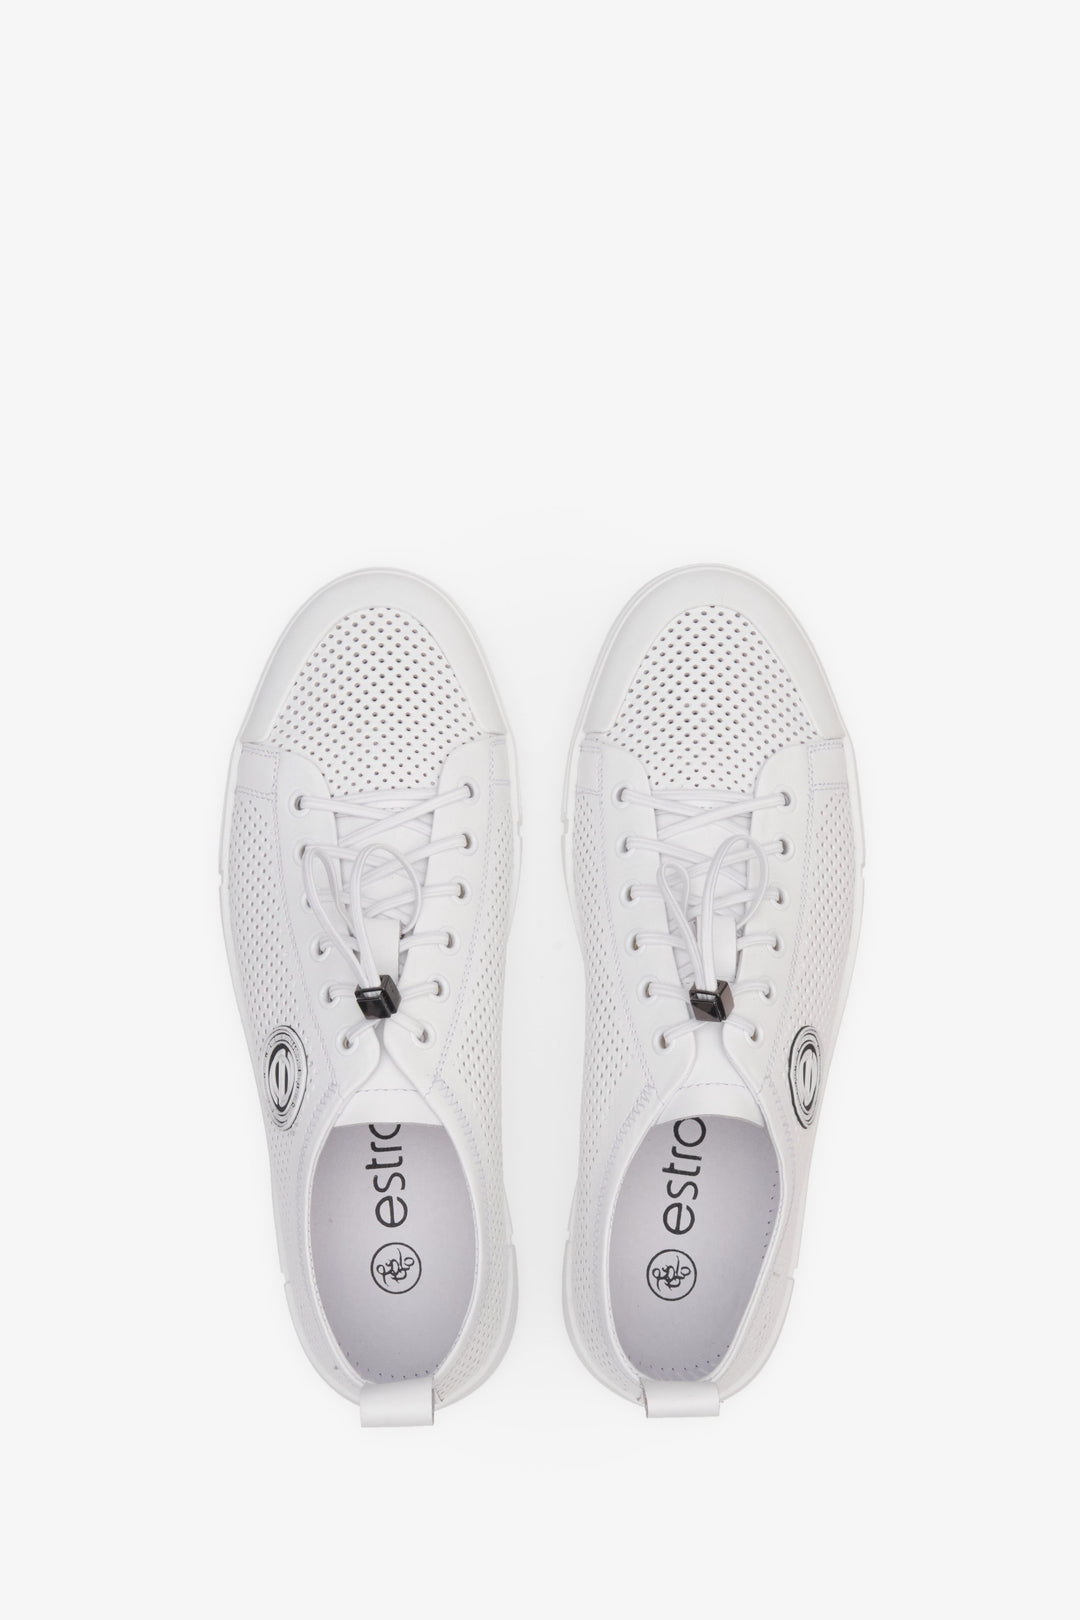 Summer men's sneakers in white made on natural leather - presentation of the shoes from above.